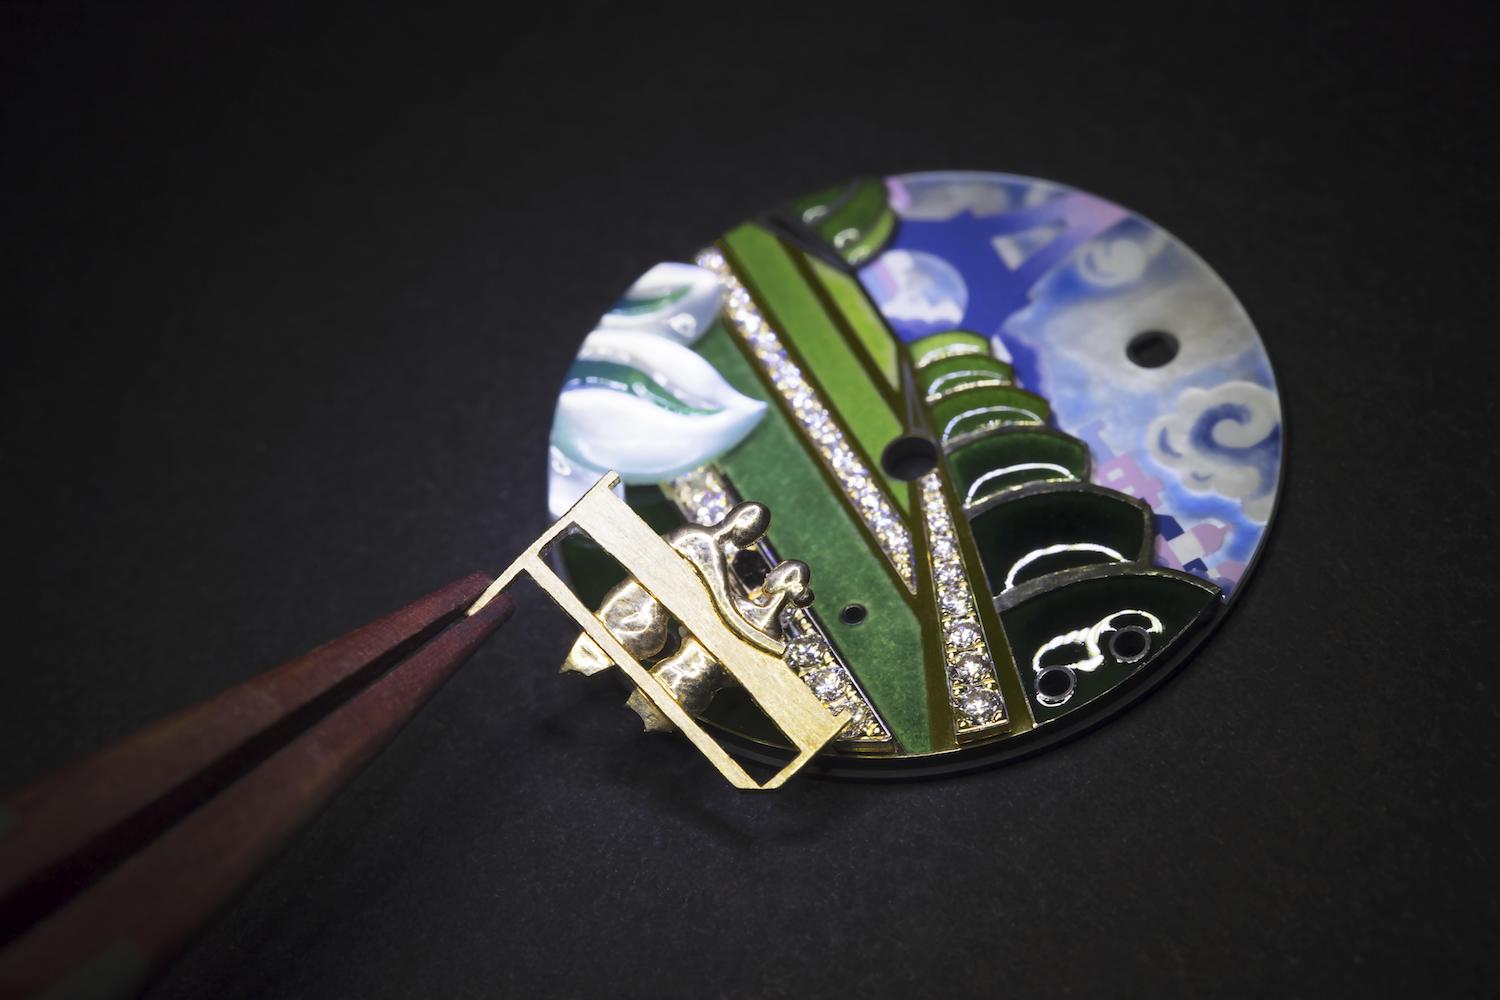 Van Cleef & Arpels spins a tale of romance with the new Extraordinary Dials